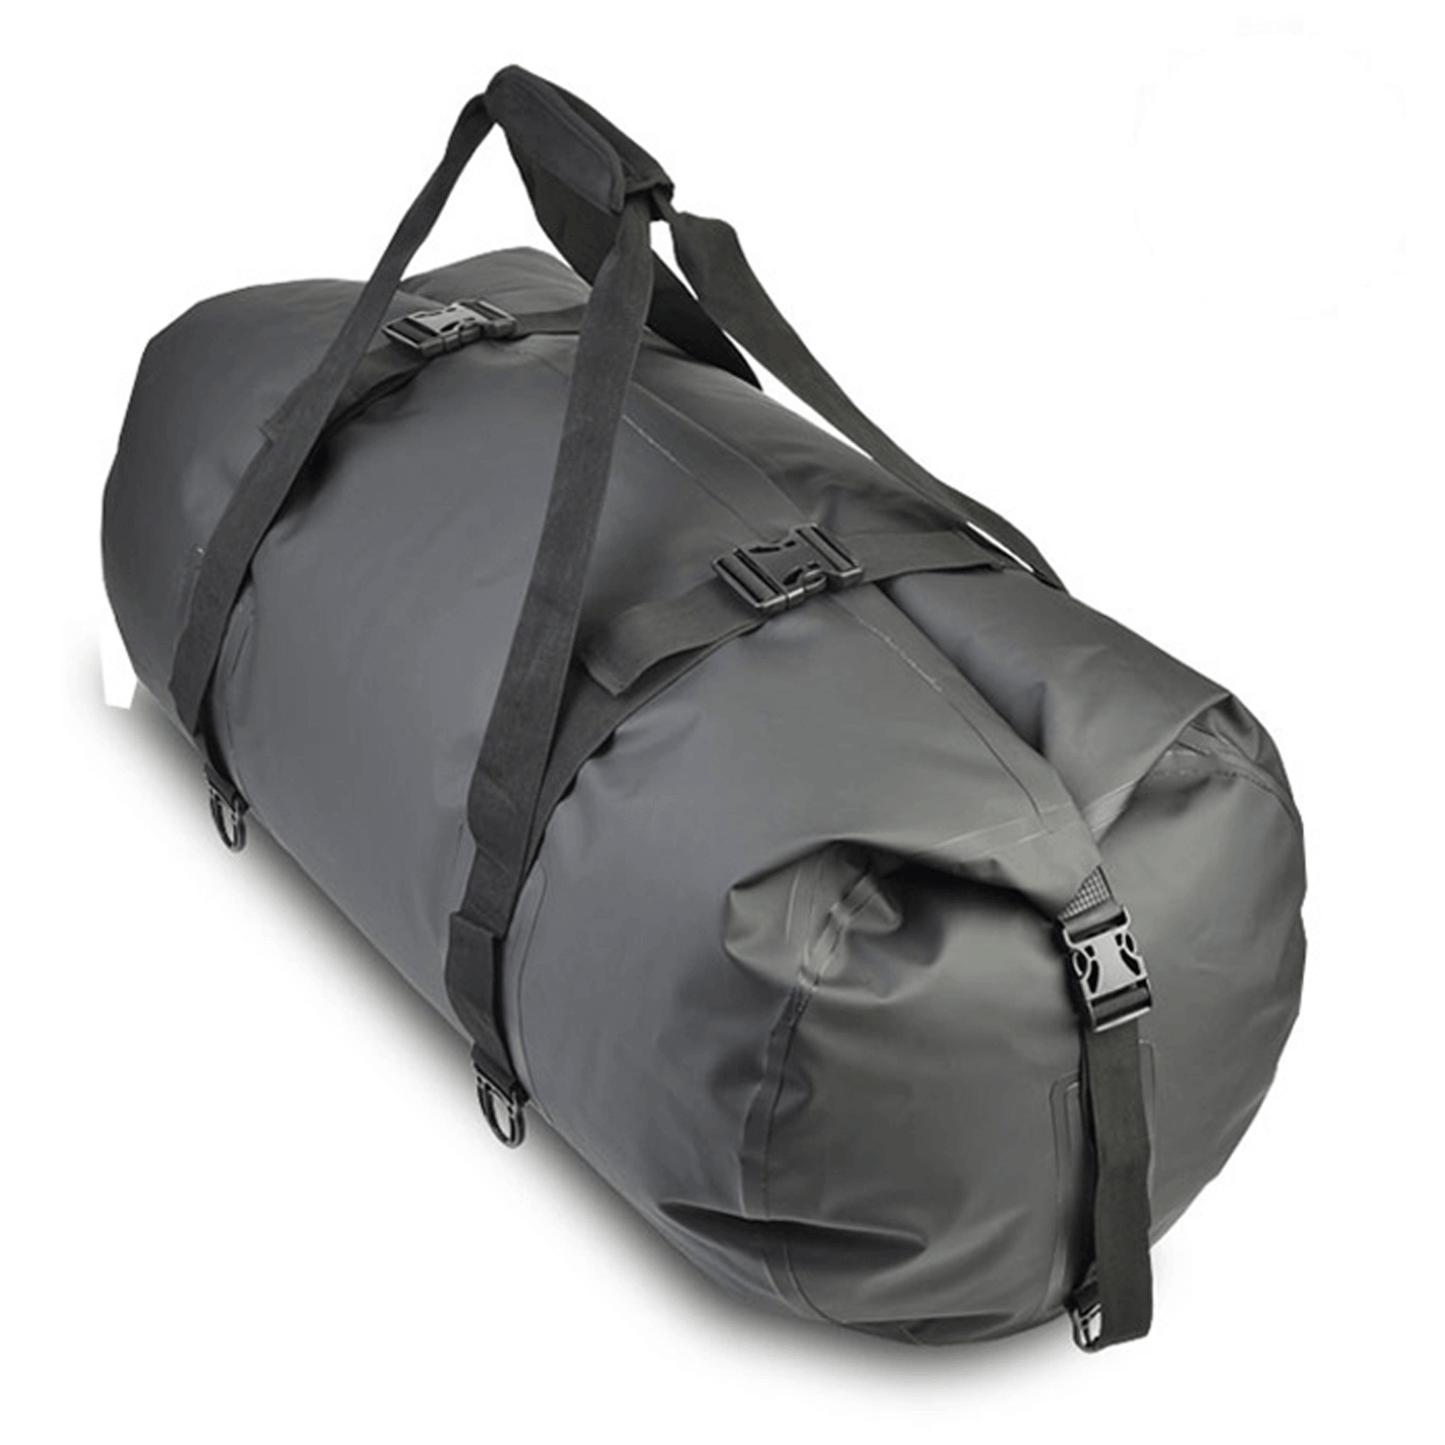 AWOL DIVER XX-Large Duffle Bag 886096 Harvest & Extraction 853336007164